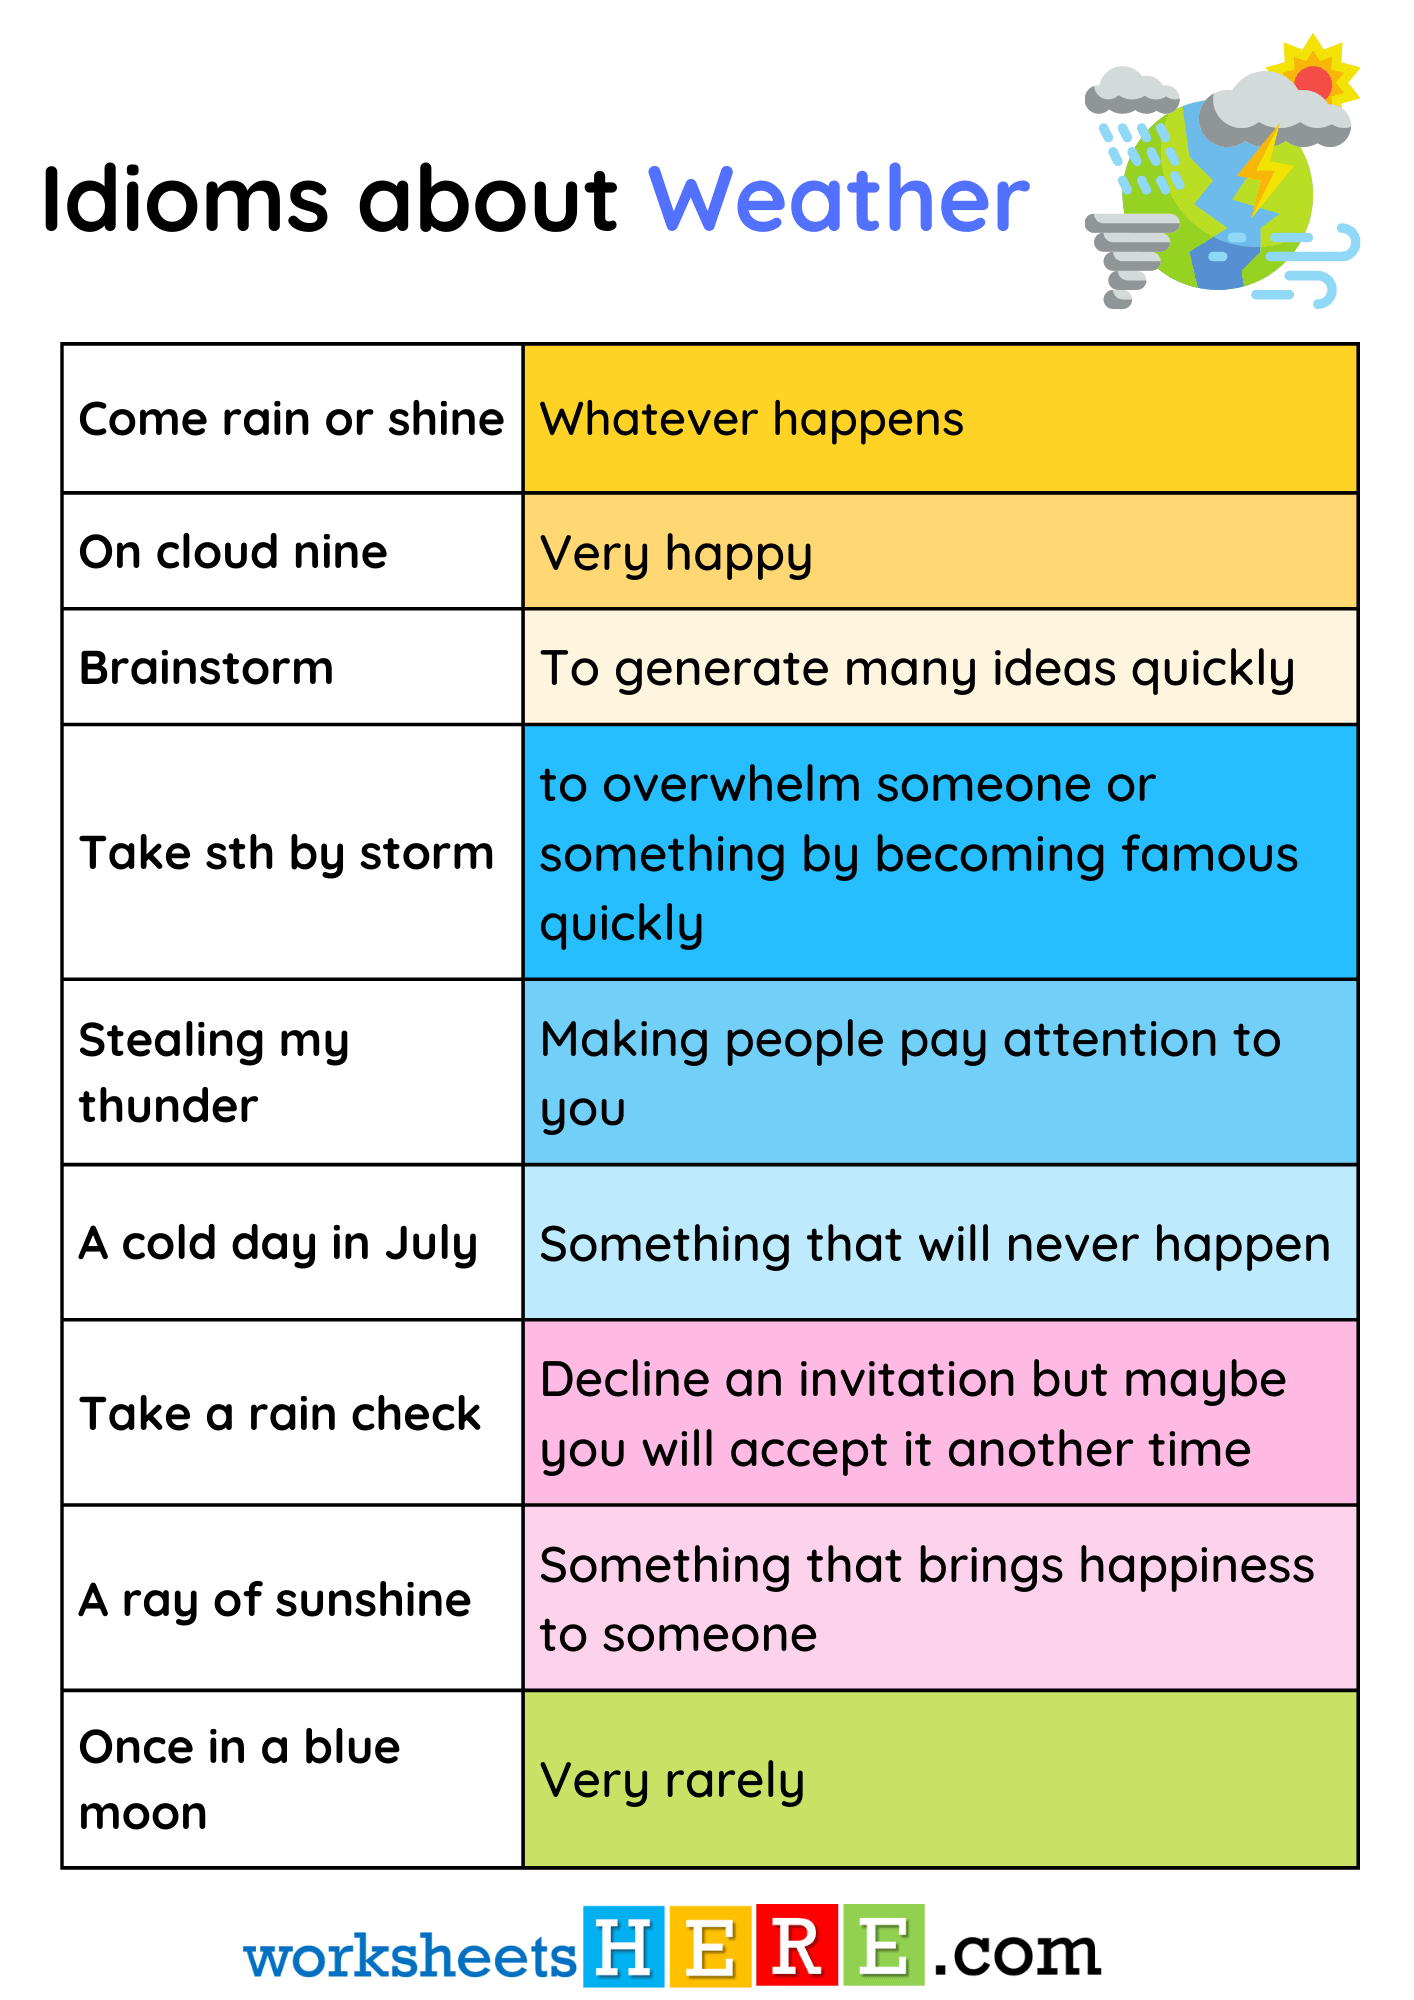 Idioms about Weather List and Meaning PDF Worksheet For Students and Kids